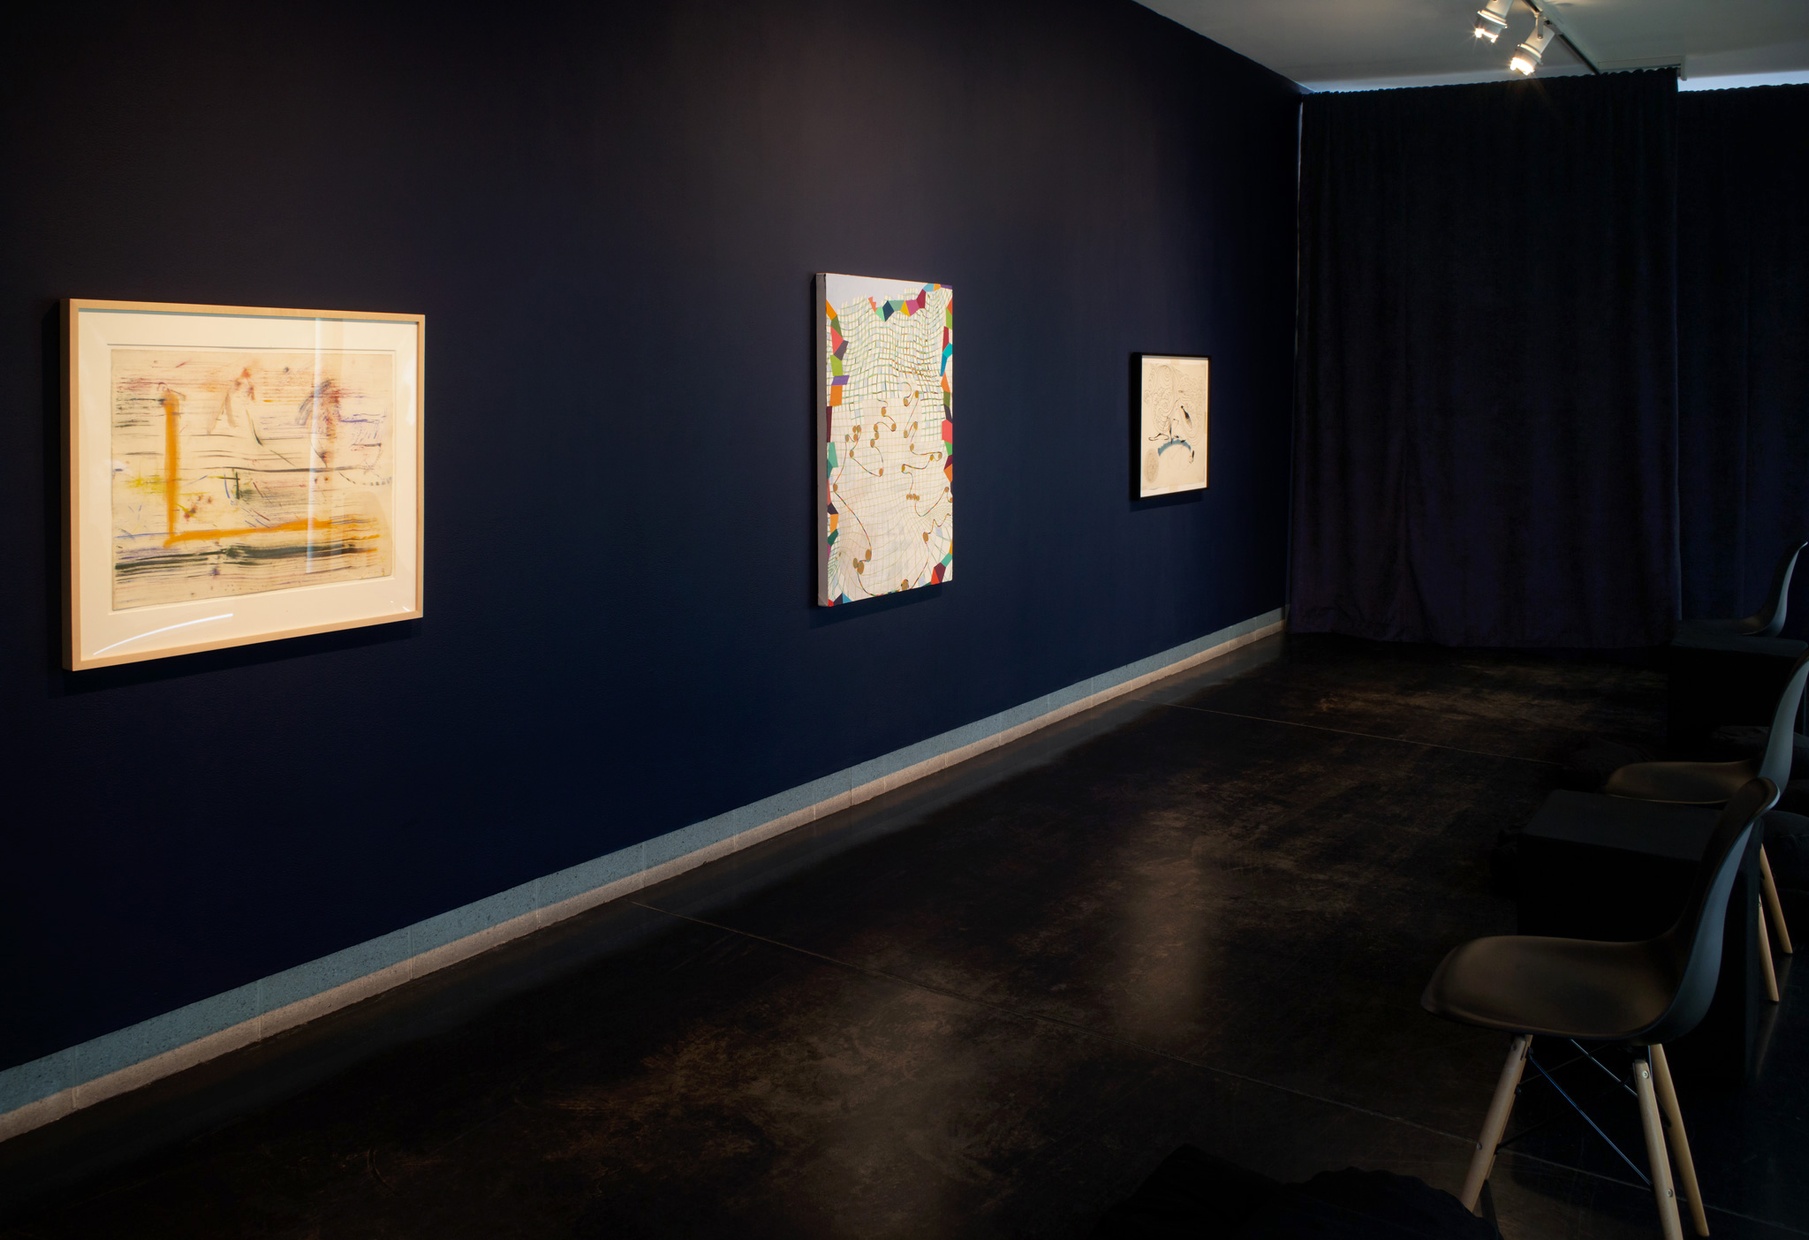 Three abstract artworks hang on a navy blue wall in a dark room with multiple black chairs facing the art.